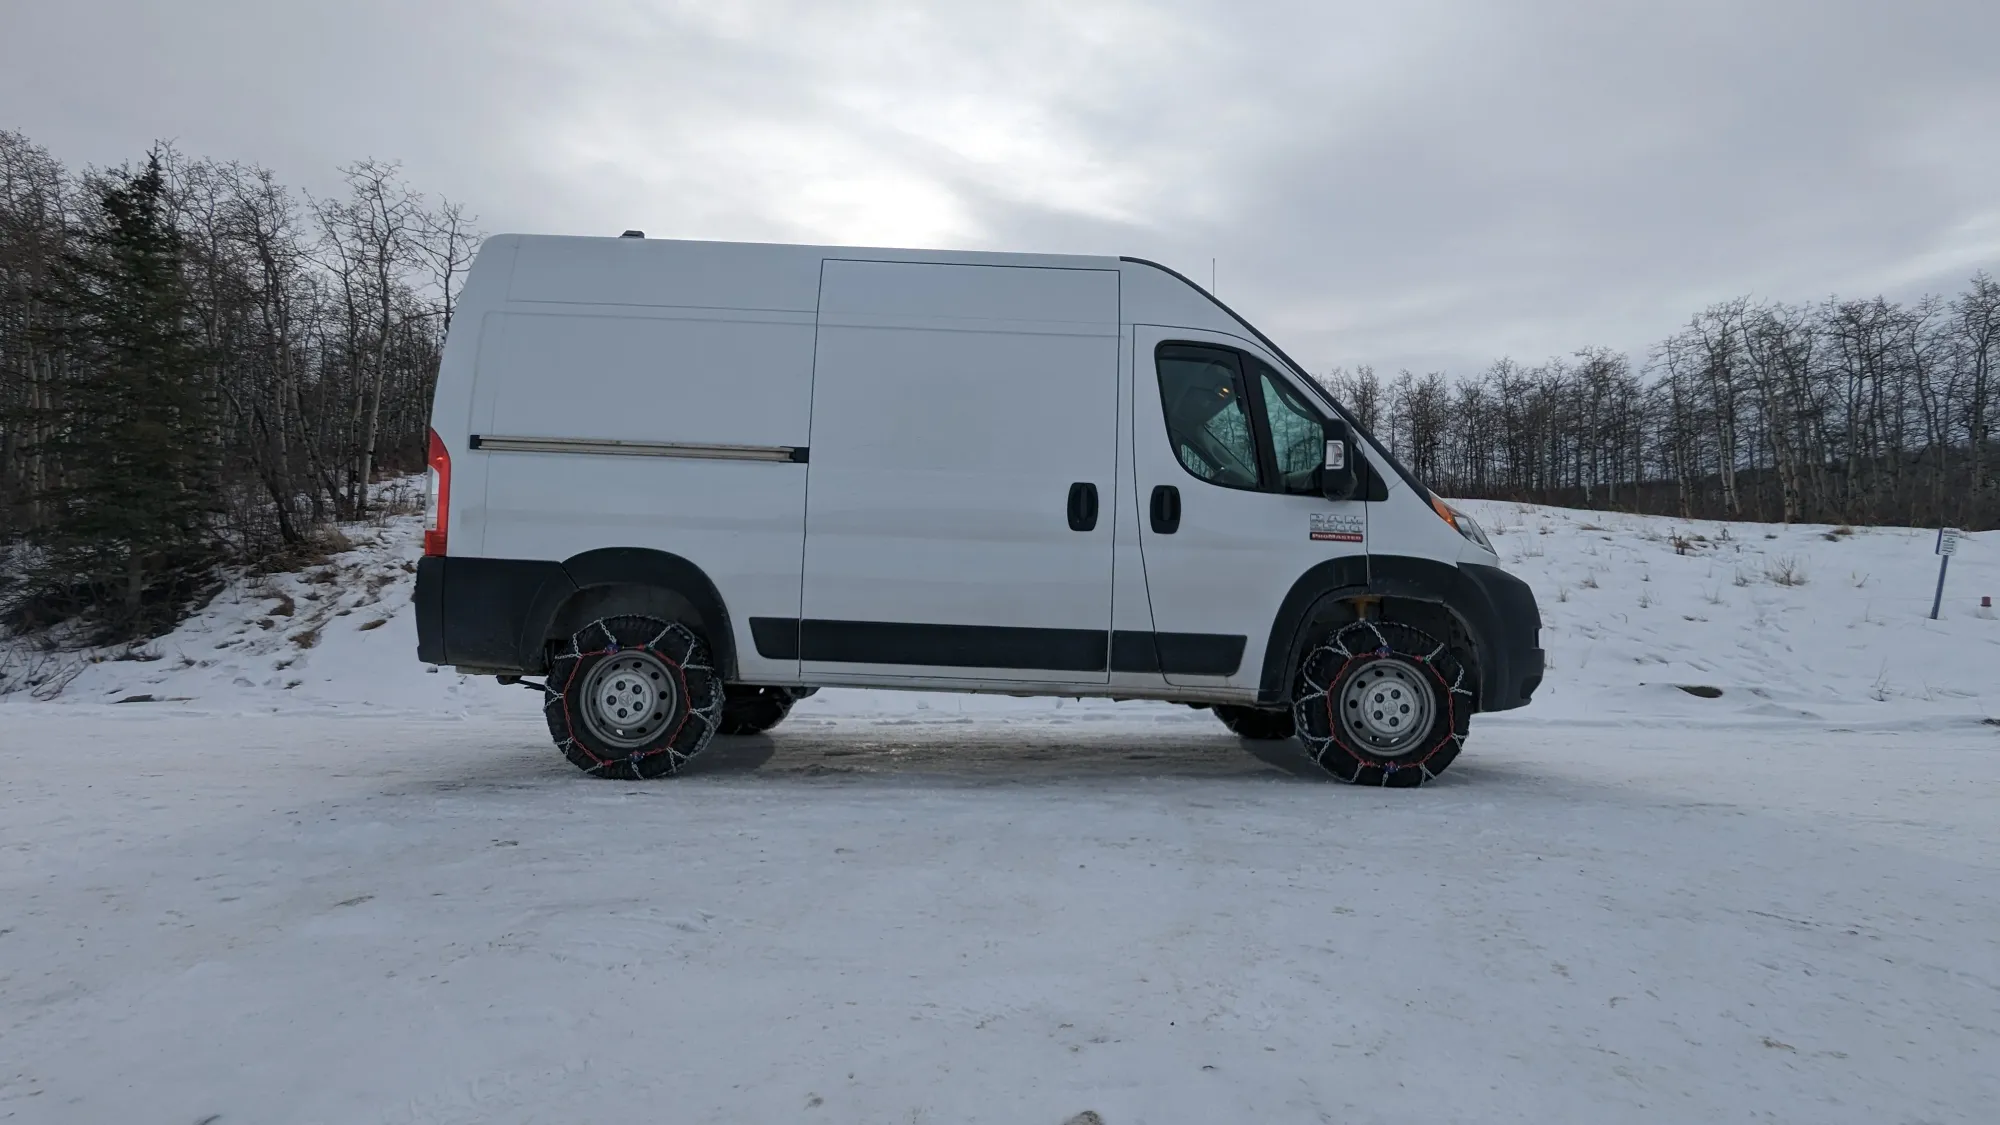 Can You Live In A Van In The Winter? Tips and Strategies for Winter Van Life.